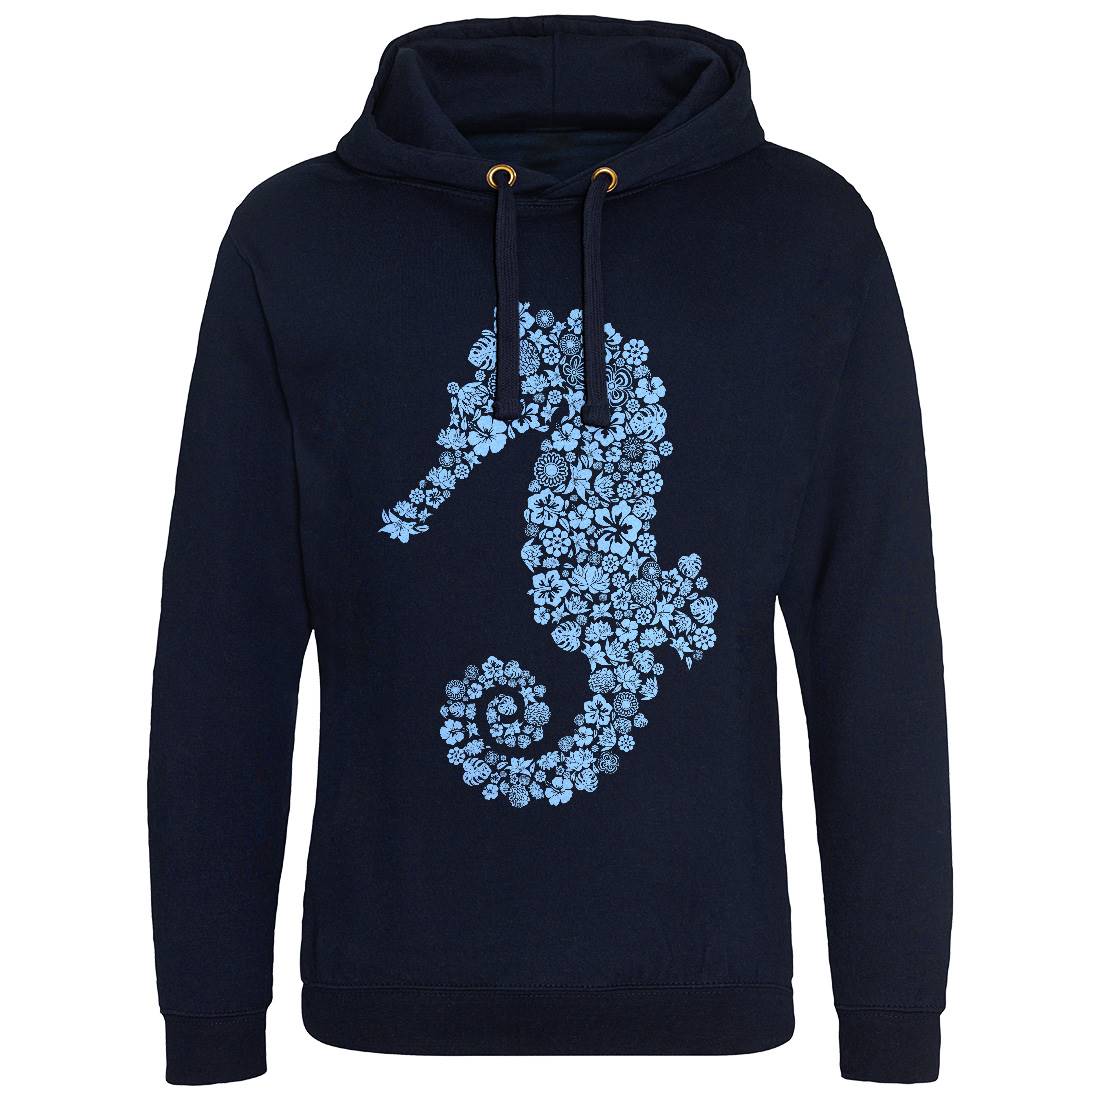 Sea Horse Mens Hoodie Without Pocket Navy B075